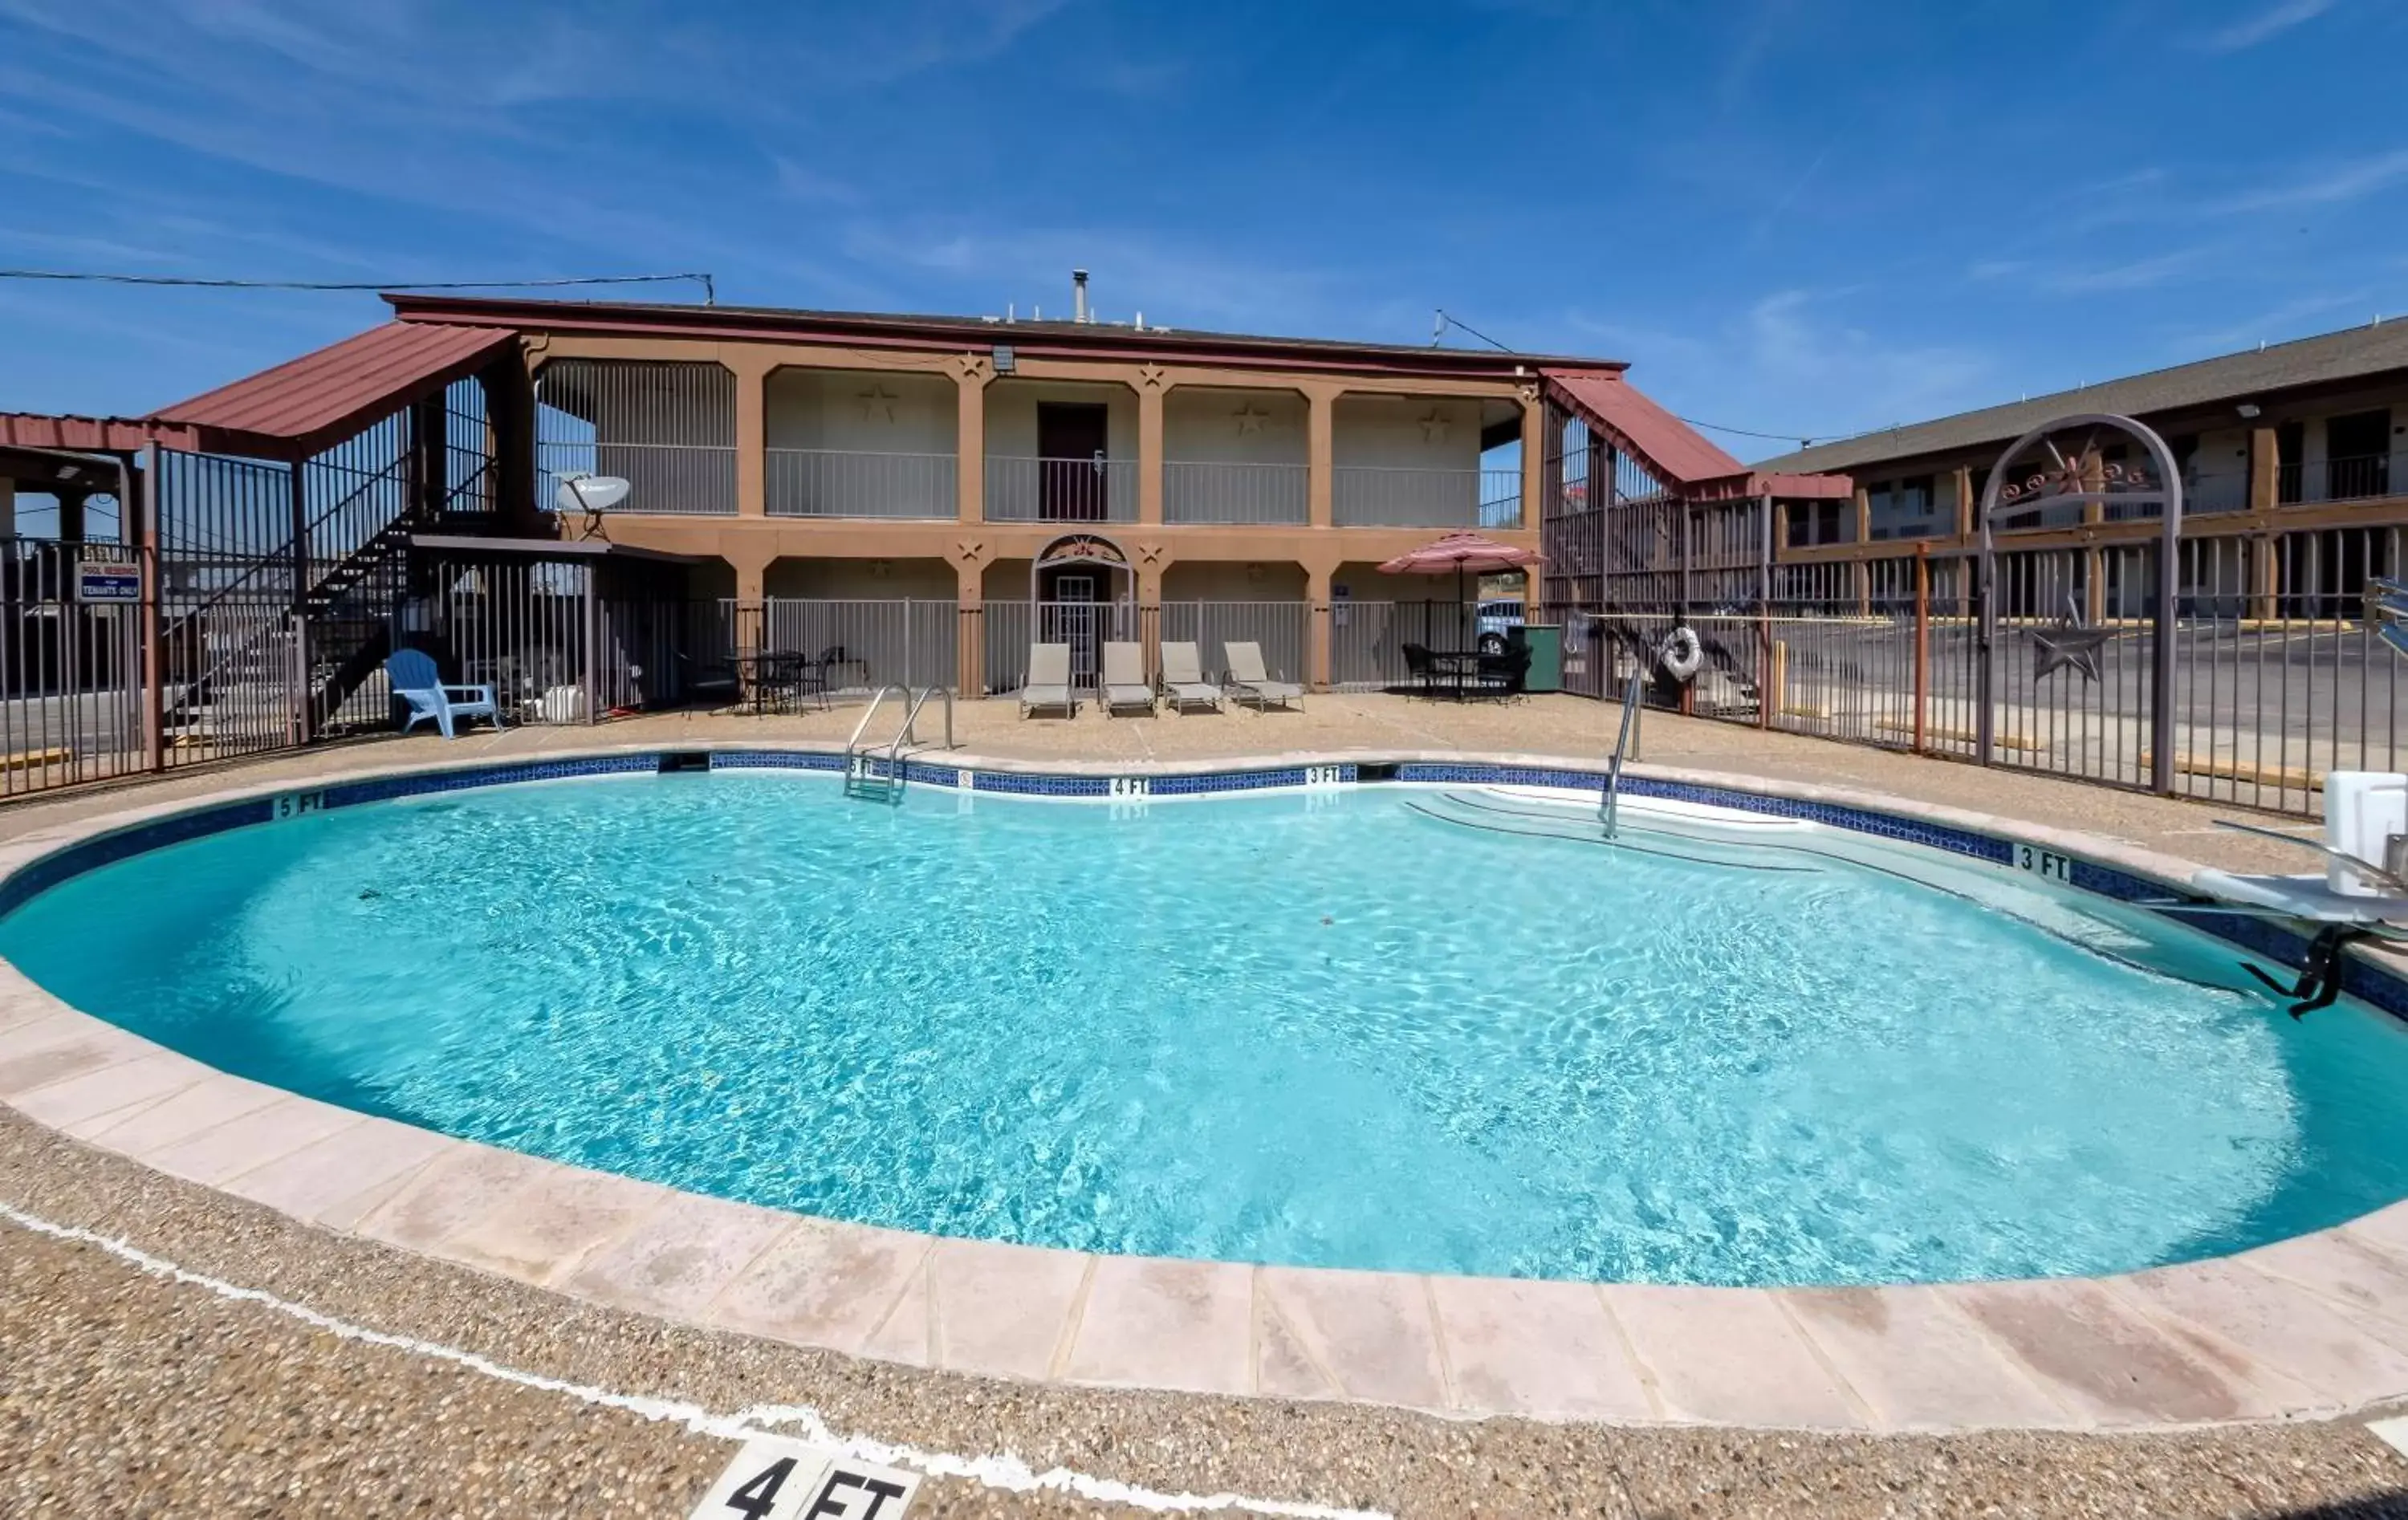 Swimming pool, Property Building in Red Roof Inn Arlington - Entertainment District